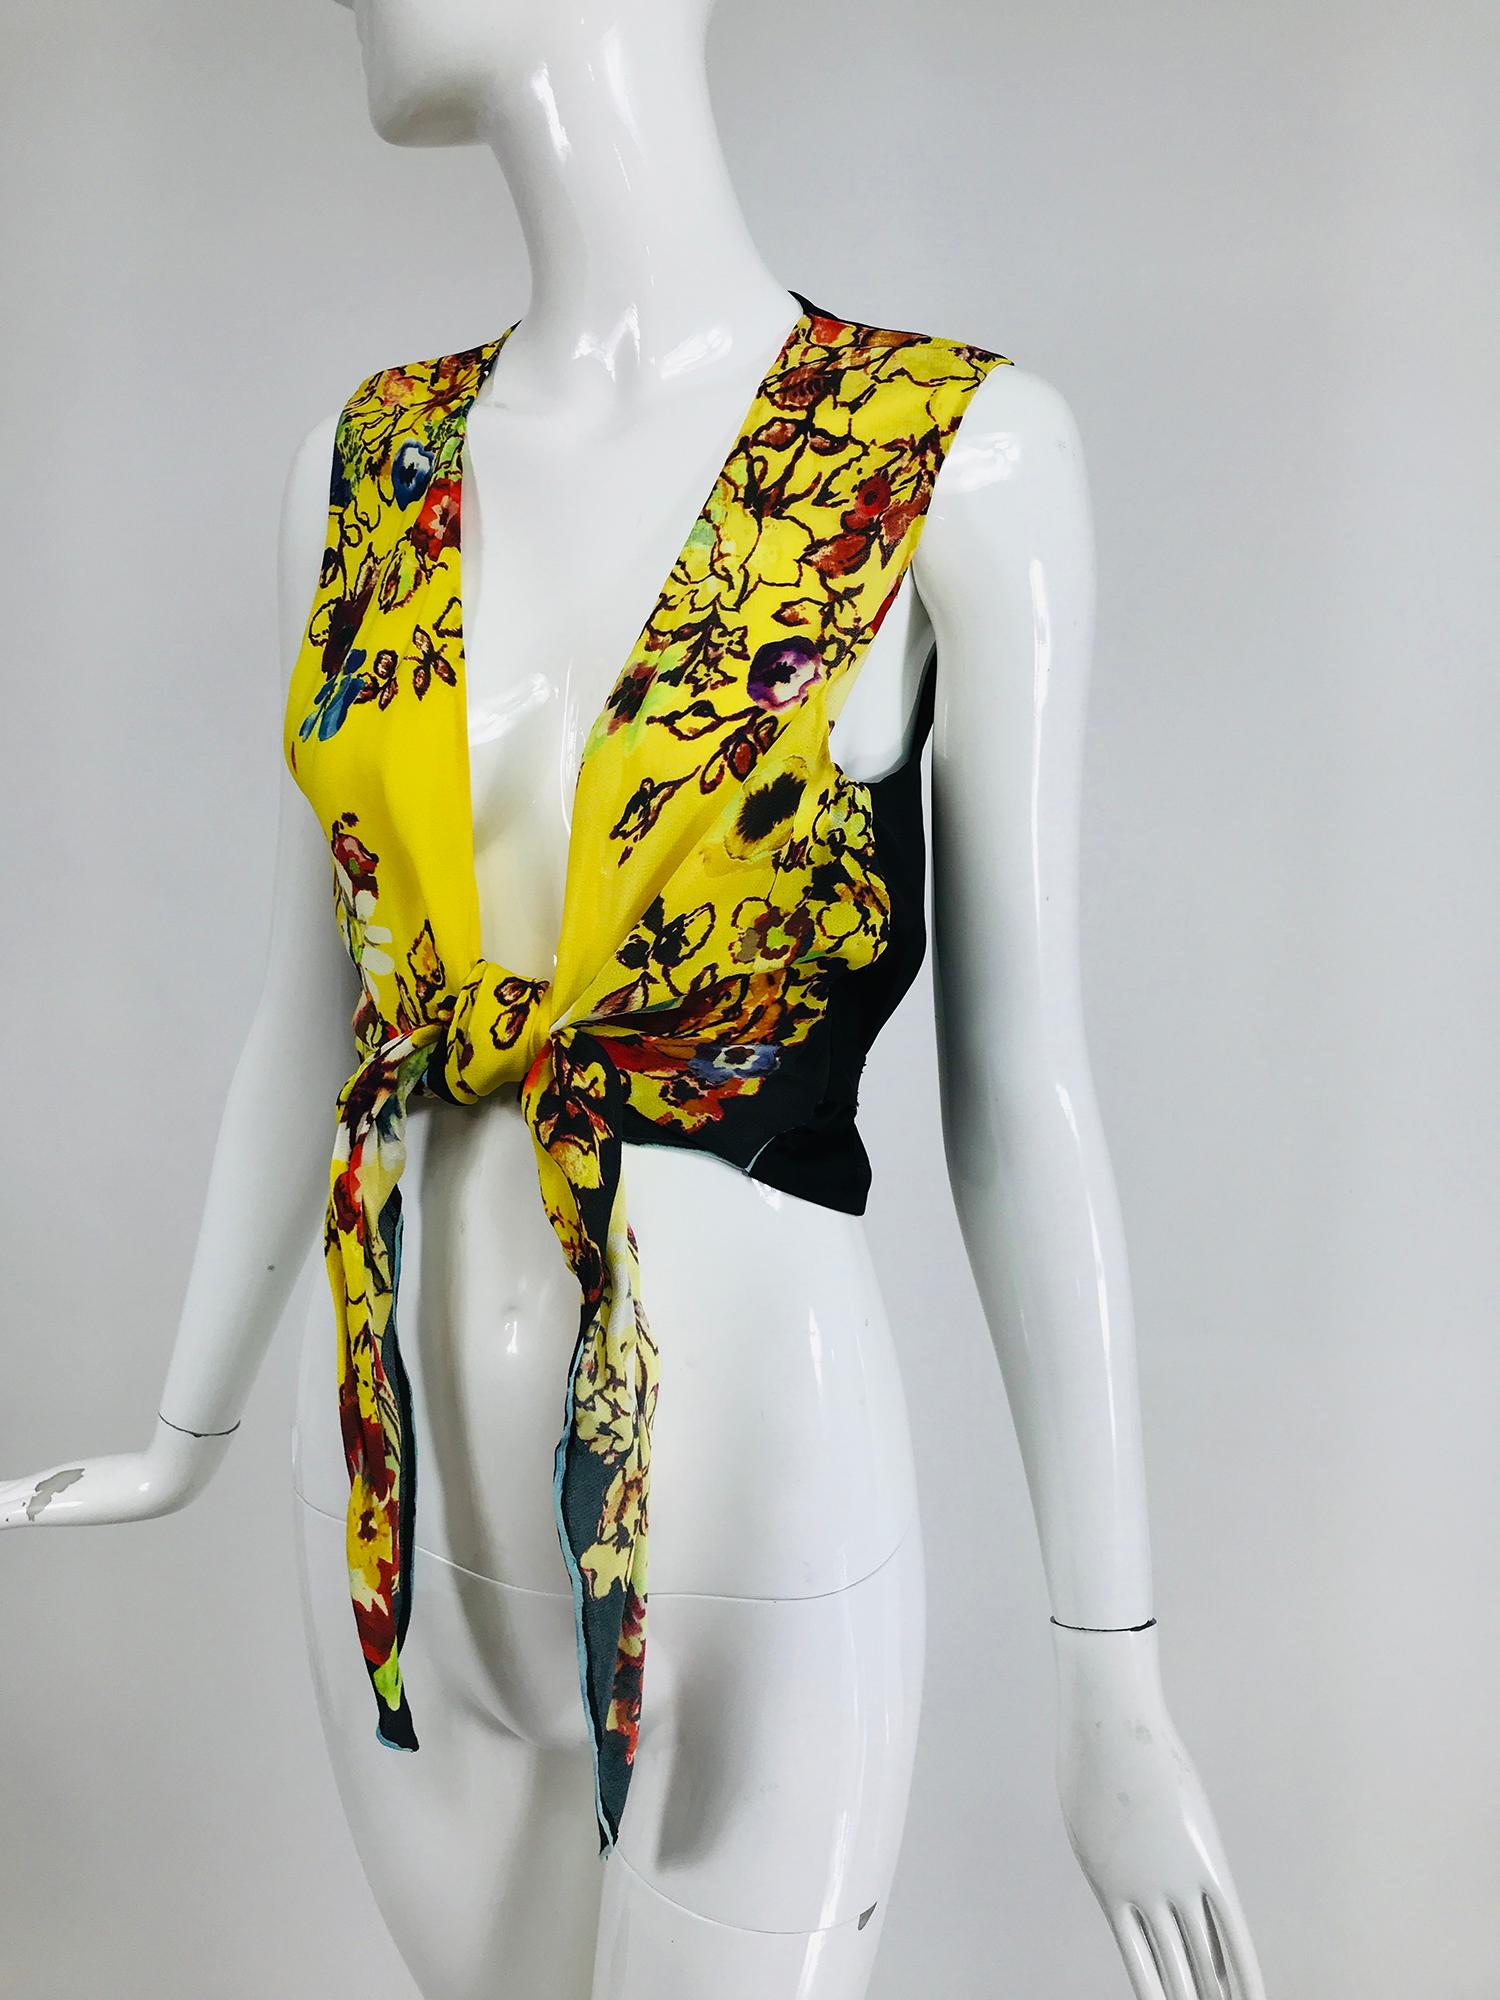 Jean Paul Gaultier Femme, tie front floral plunge V neckline top with a black vest back with a bow tie at the waist. The front ties can be tied high and tight or loose and lower. The front is unlined crepe in yellow with colourful fantasy flowers.